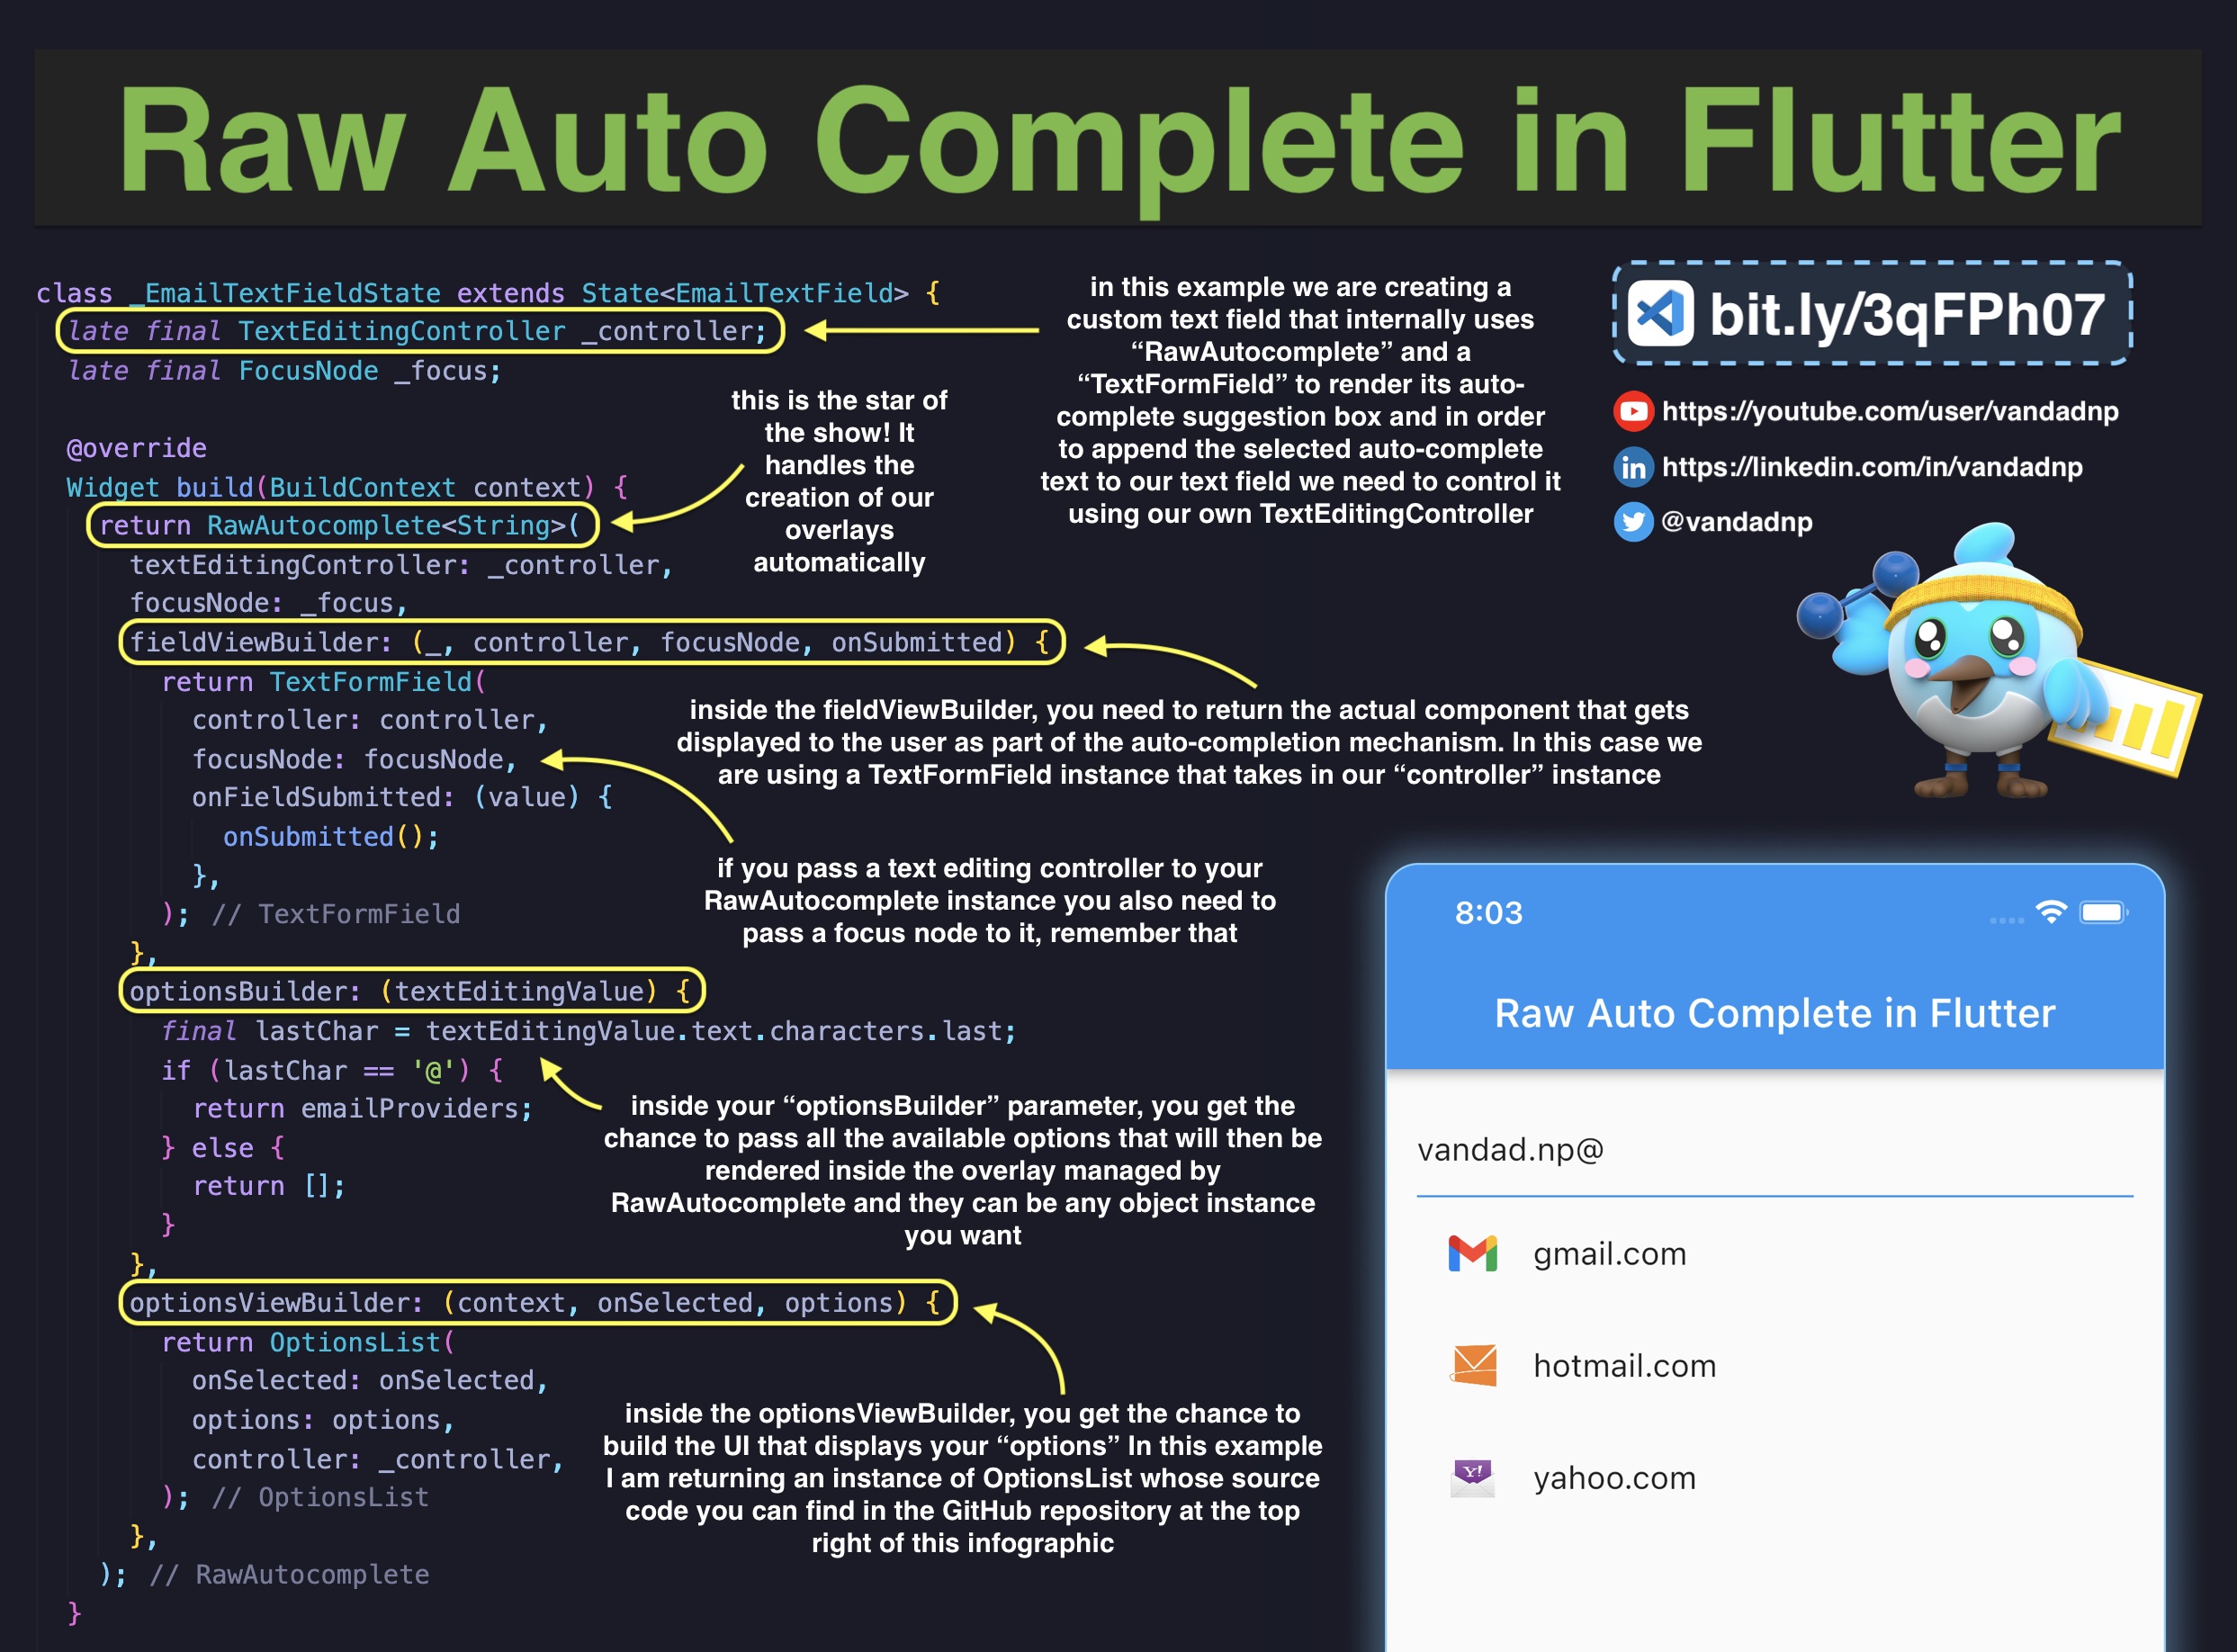 raw-auto-complete-in-flutter.jpg